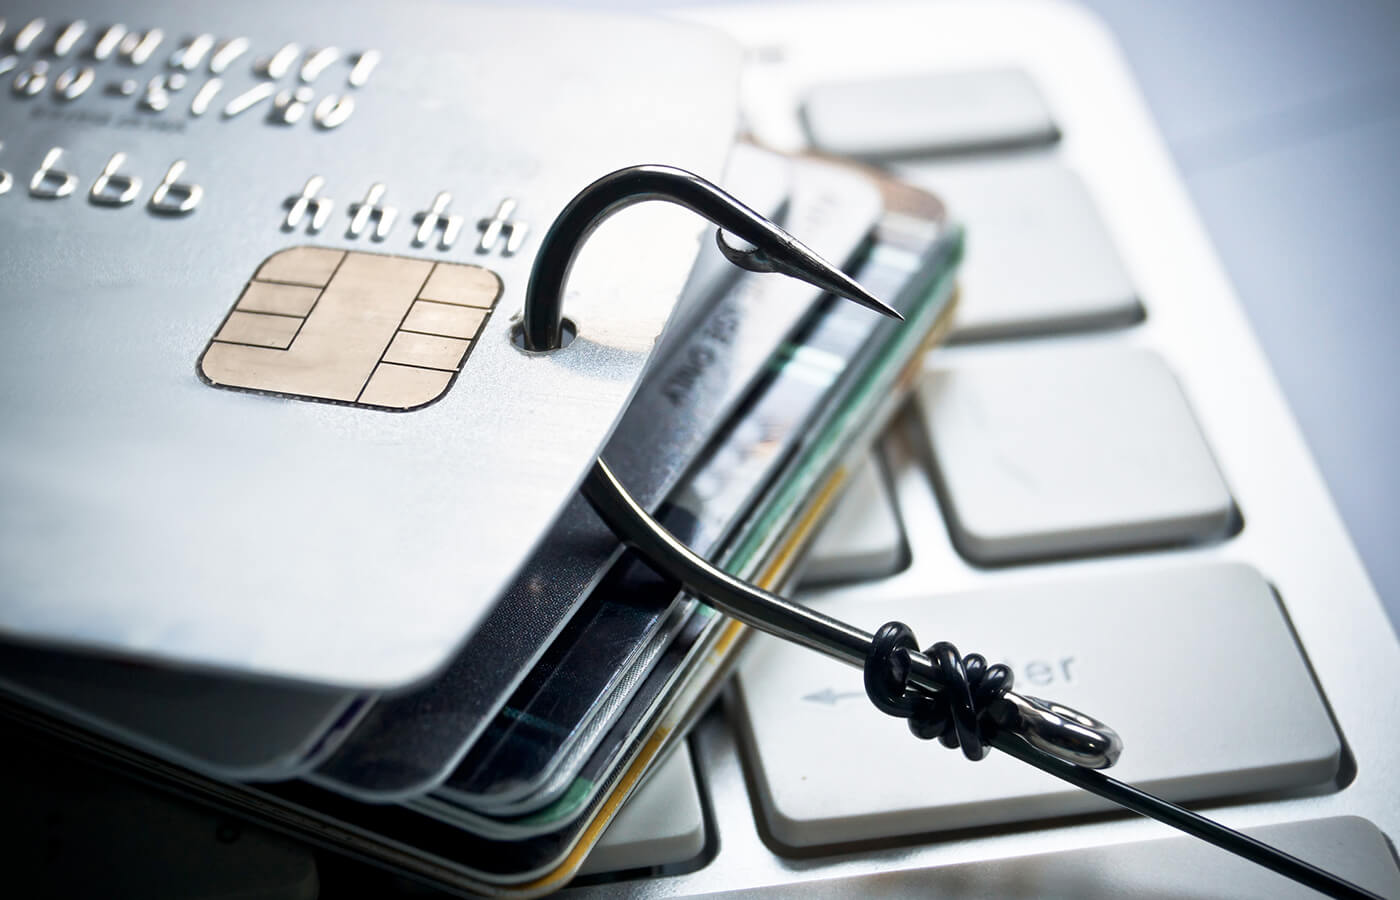 Understanding The Risks: What Someone Can Do With Your SIM Card